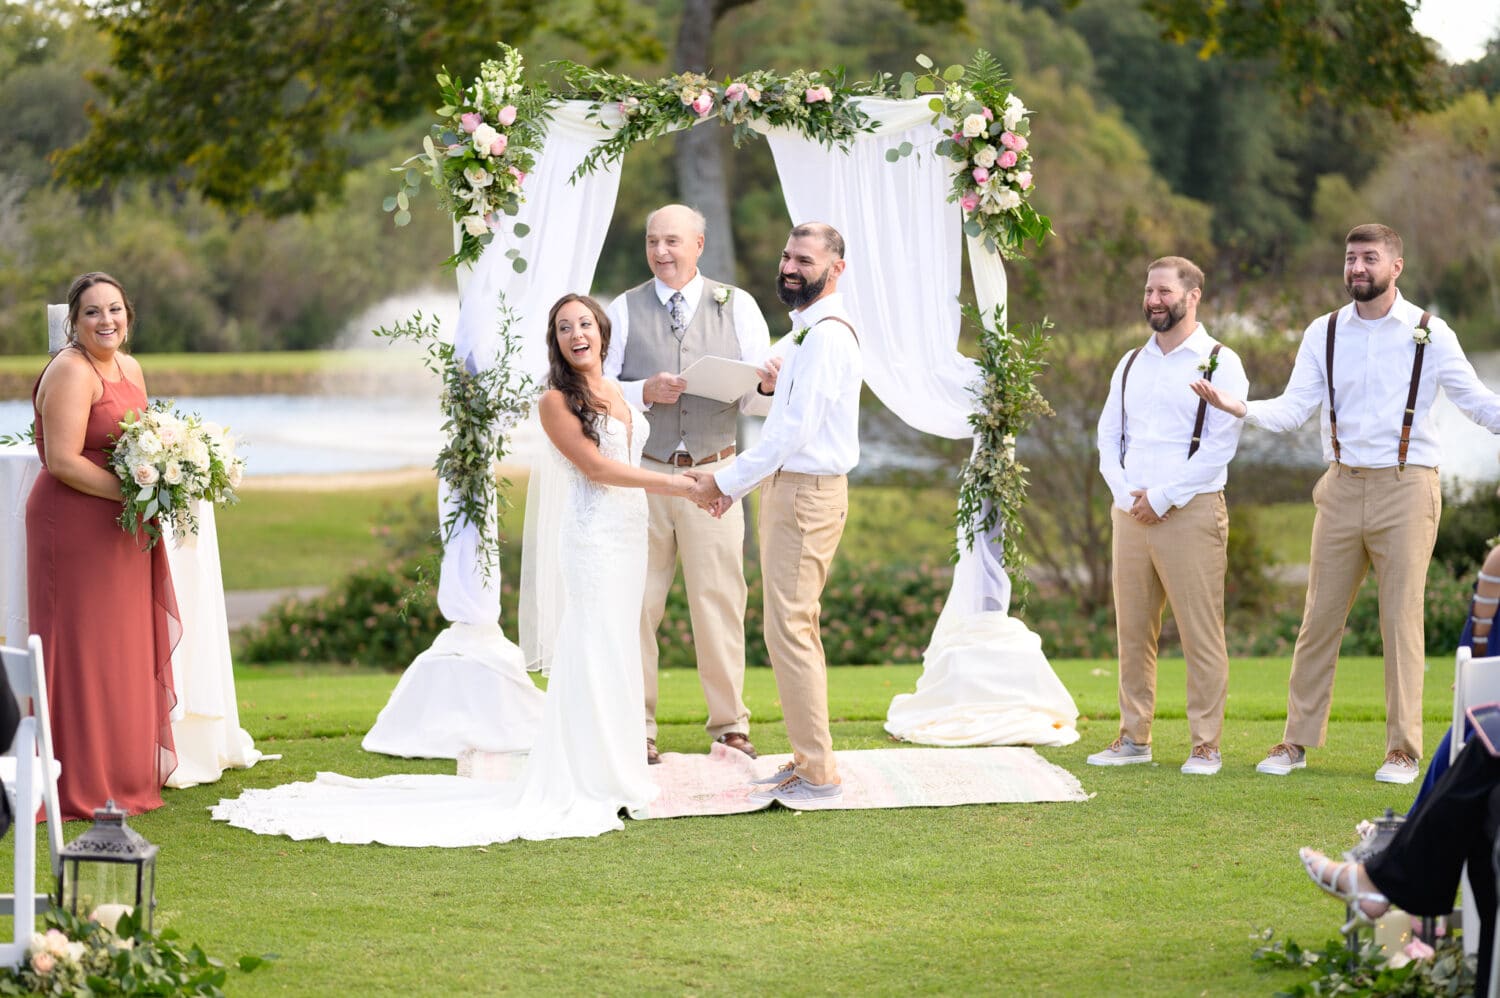 Laughter during the ceremony - Pawleys Plantation